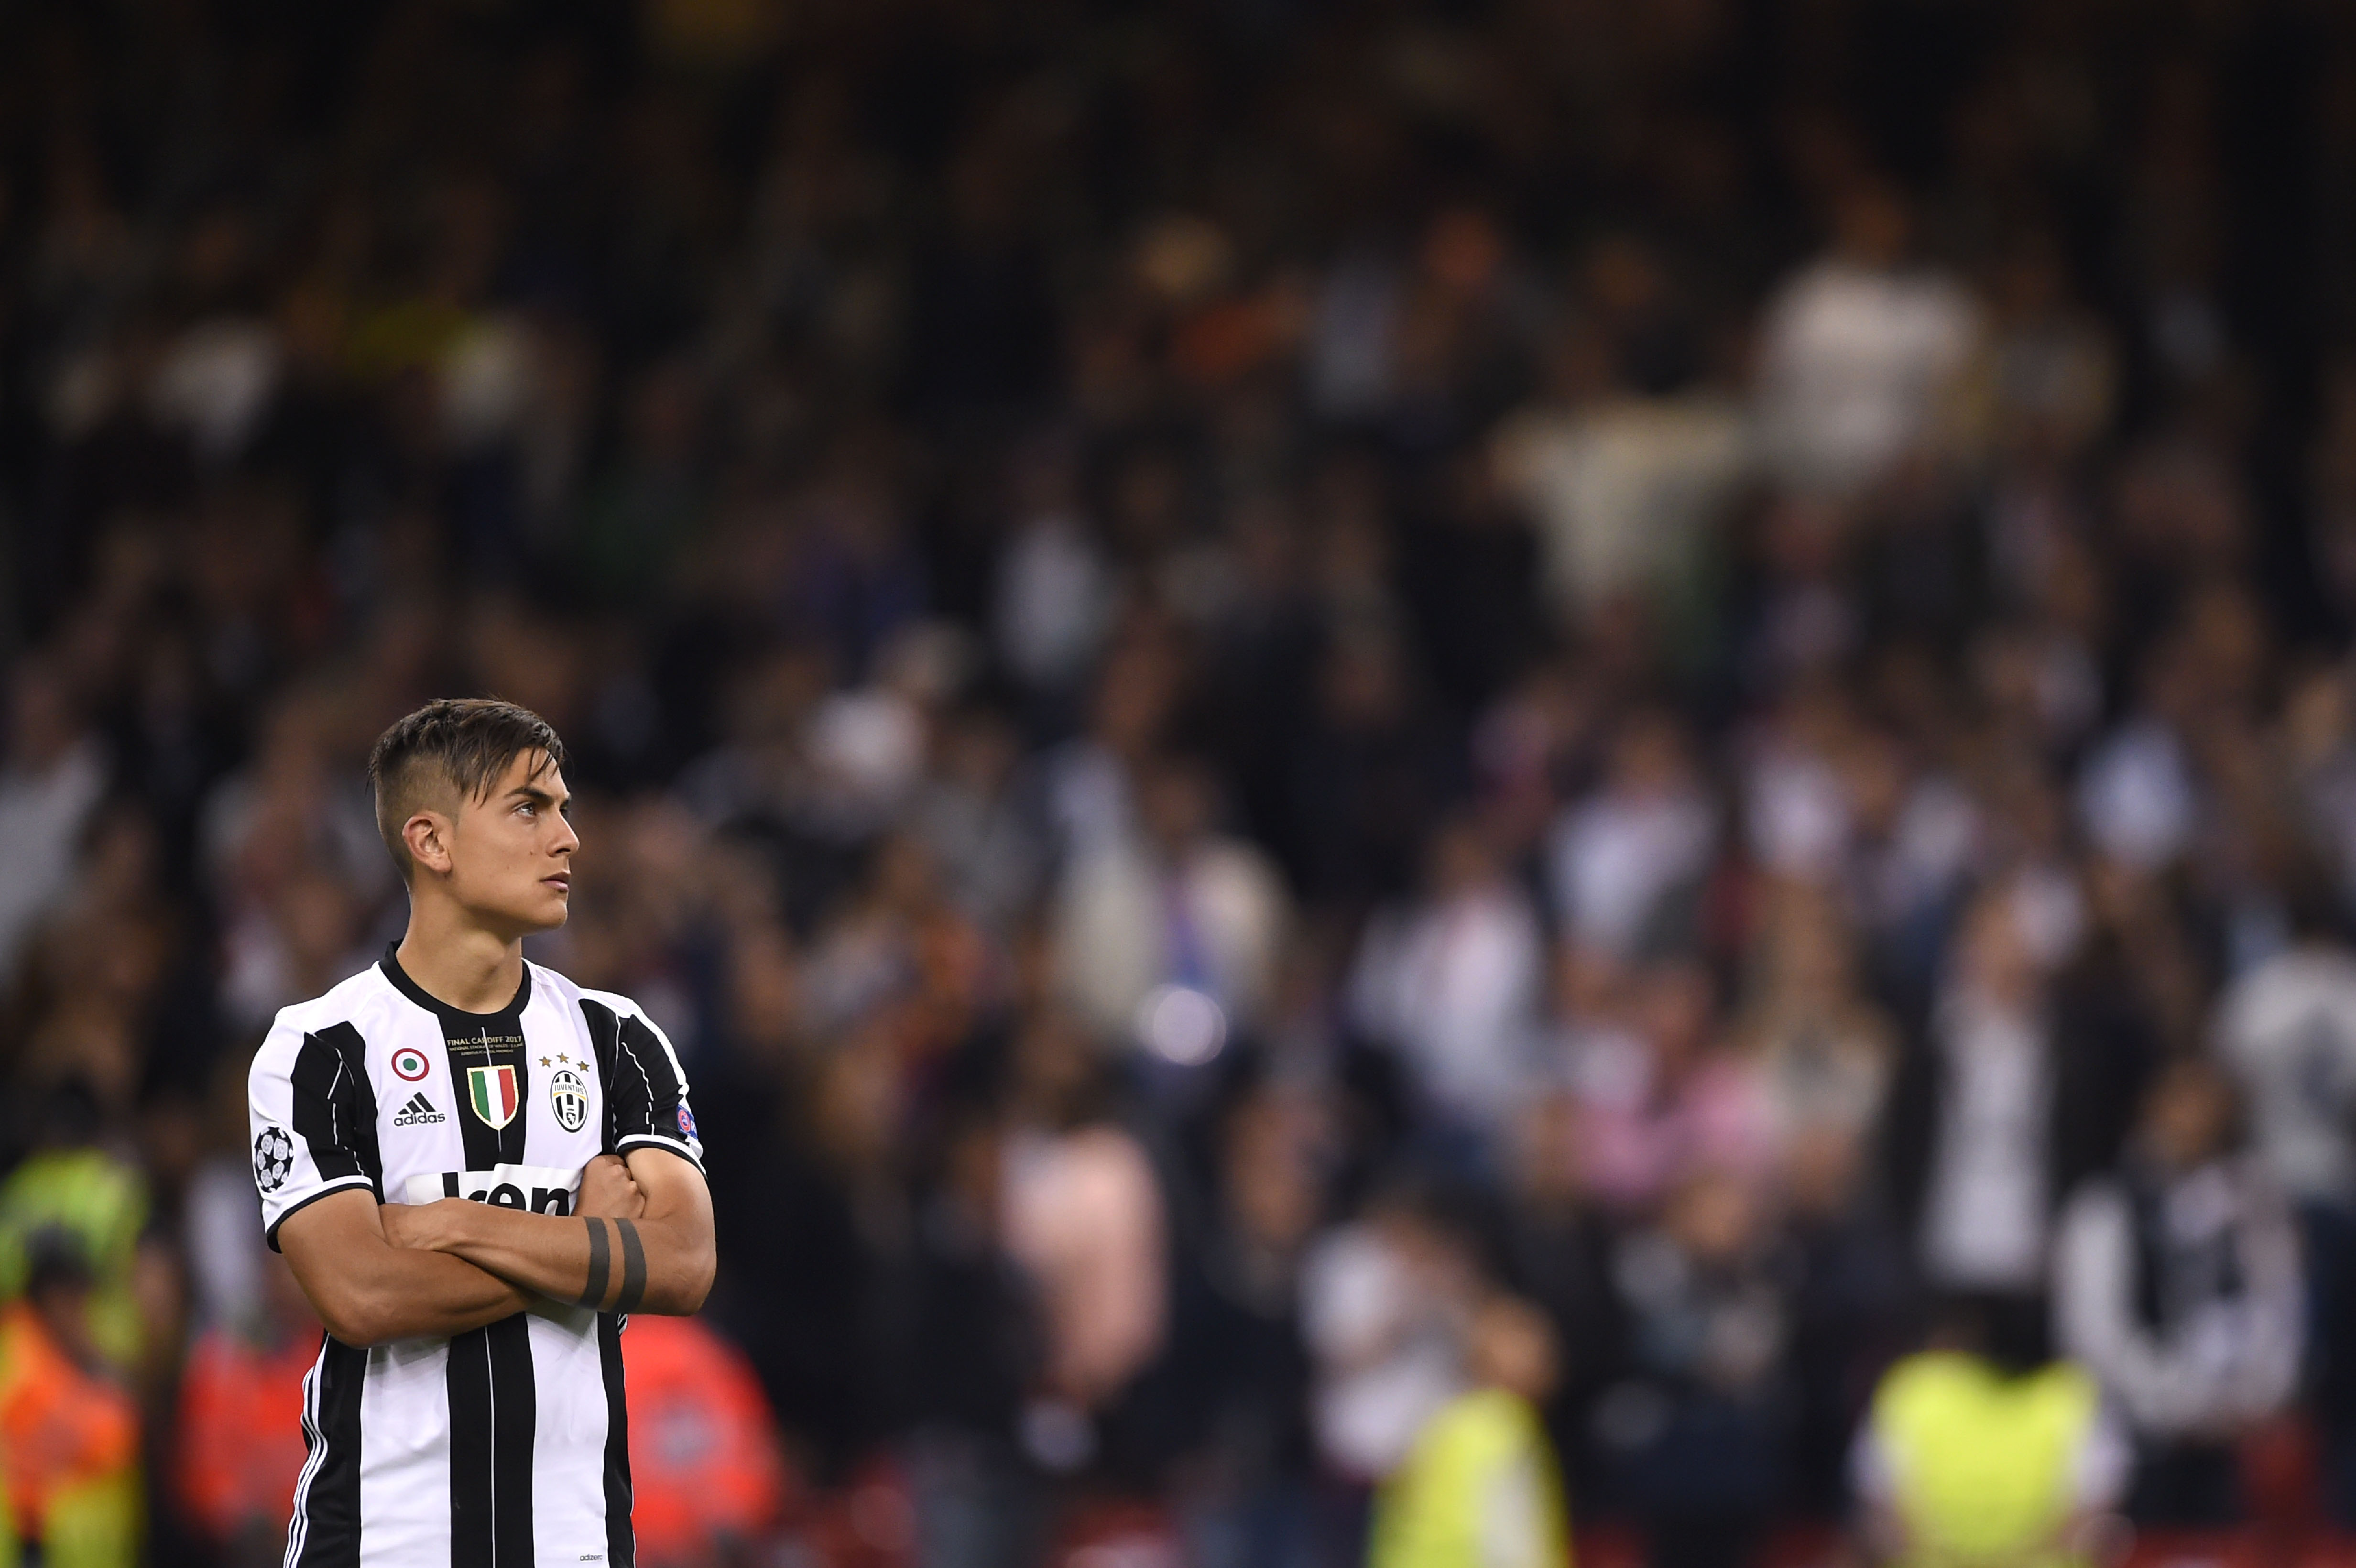 Juventus' Argentinian striker Paulo Dybala reacts after losing the UEFA Champions League final football match between Juventus and Real Madrid at The Principality Stadium in Cardiff, south Wales, on June 3, 2017. / AFP PHOTO / Filippo MONTEFORTE        (Photo credit should read FILIPPO MONTEFORTE/AFP/Getty Images)